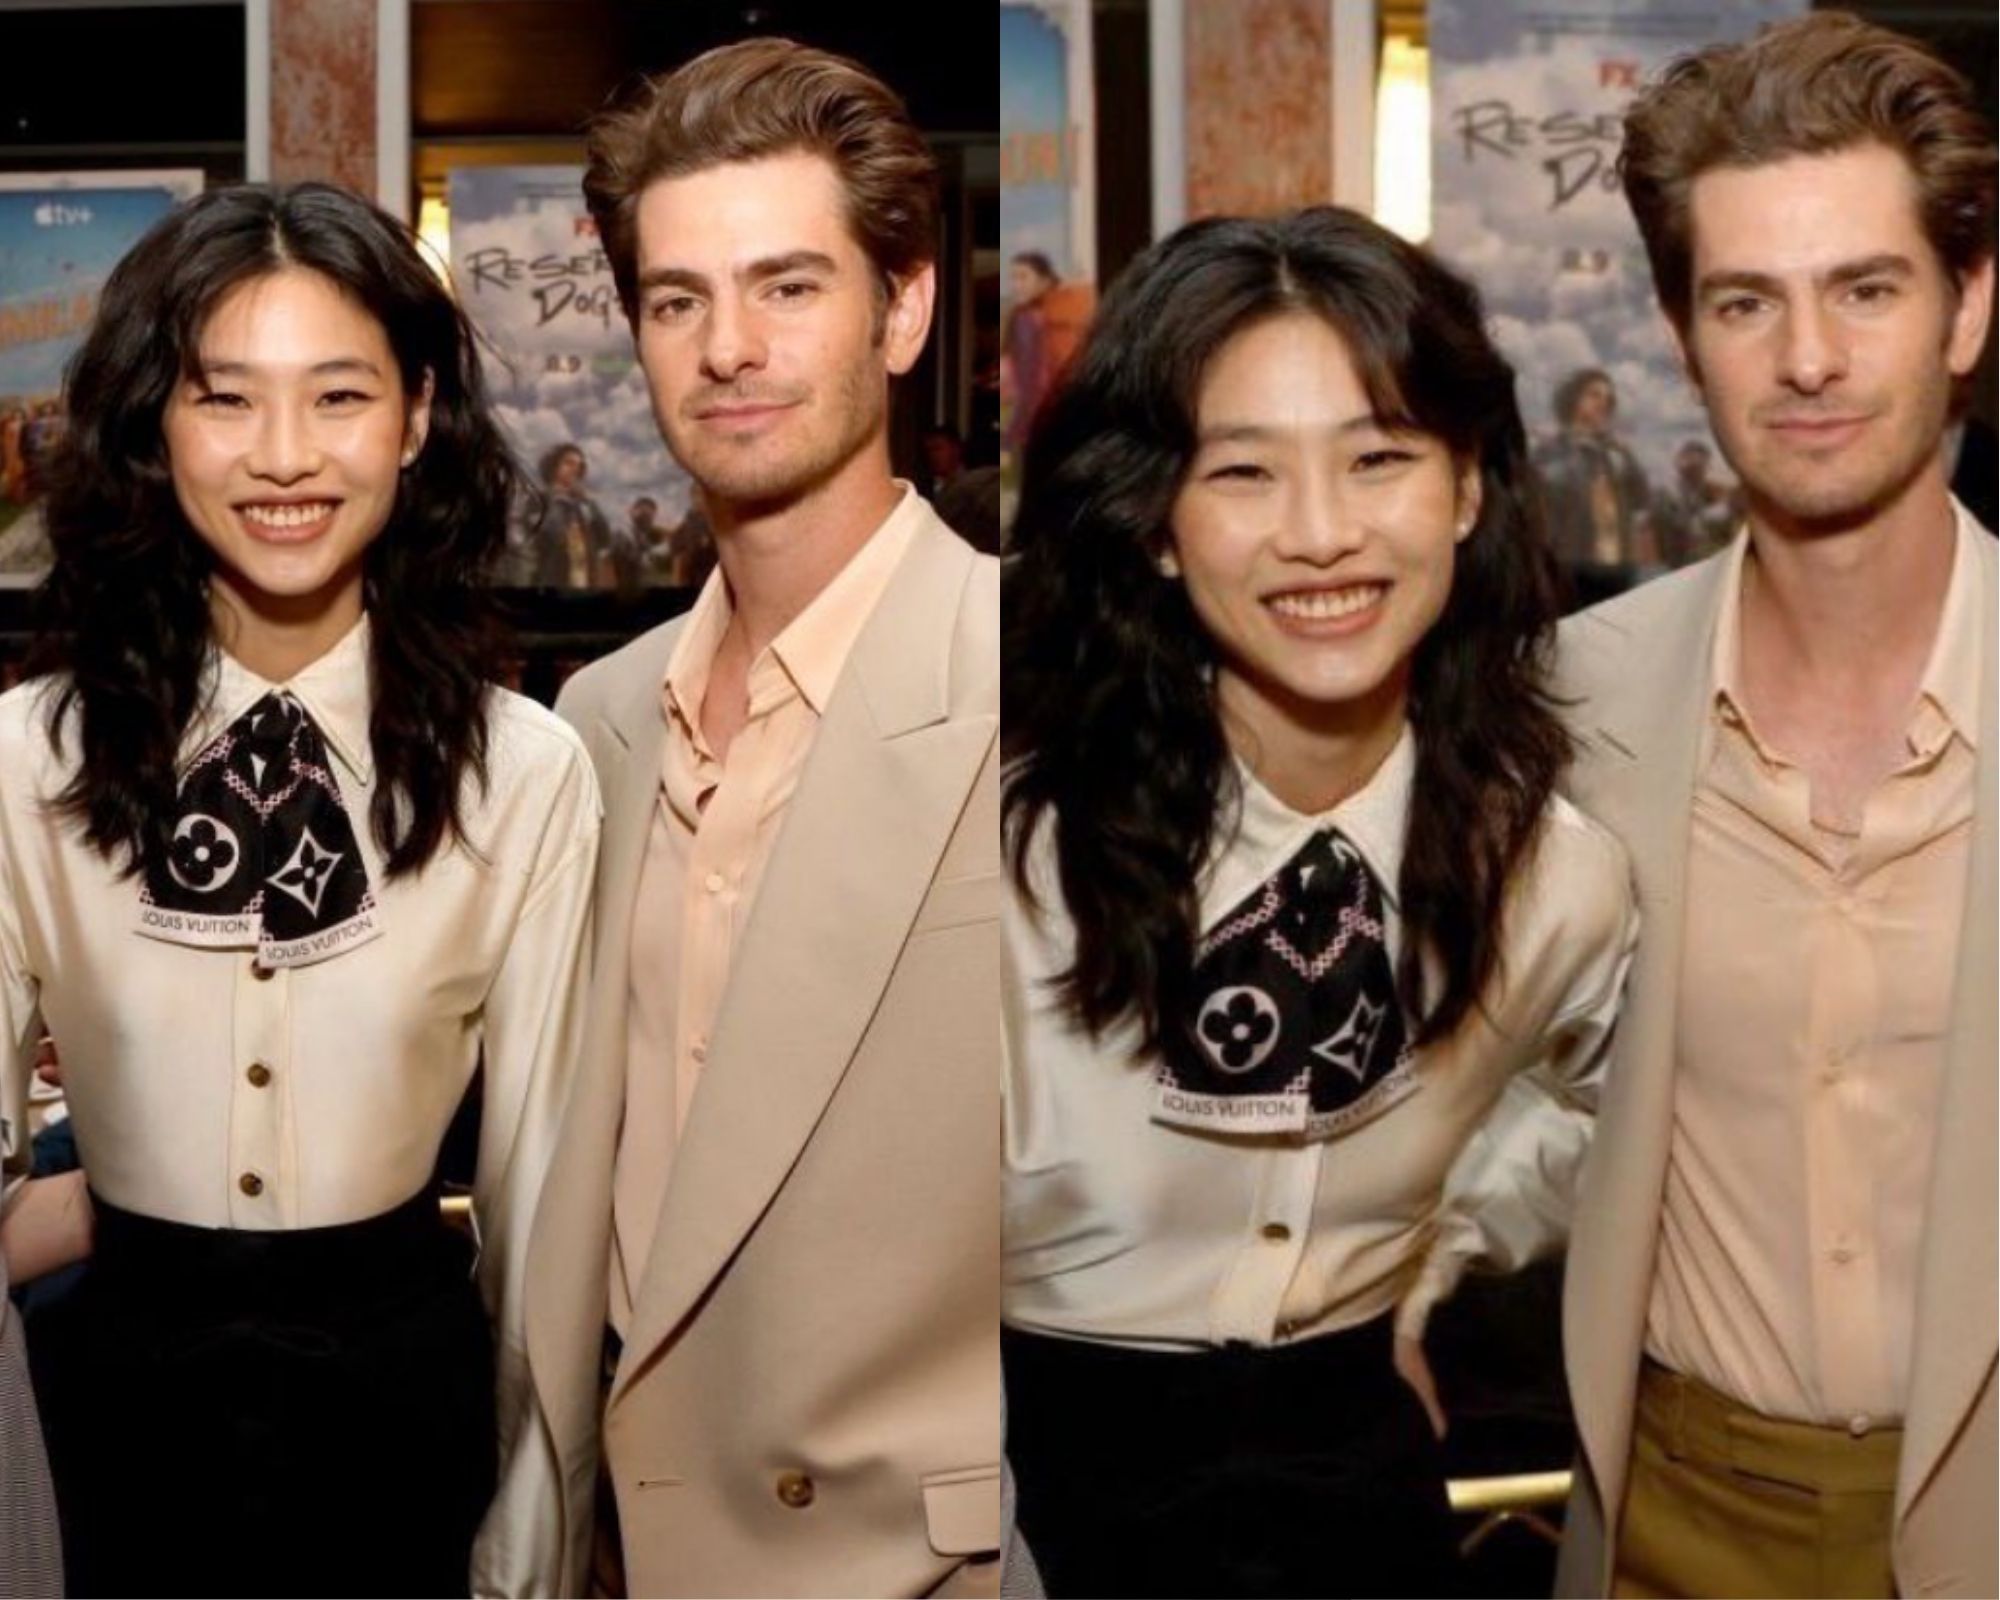 Jung Ho Yeon and Andrew Garfield